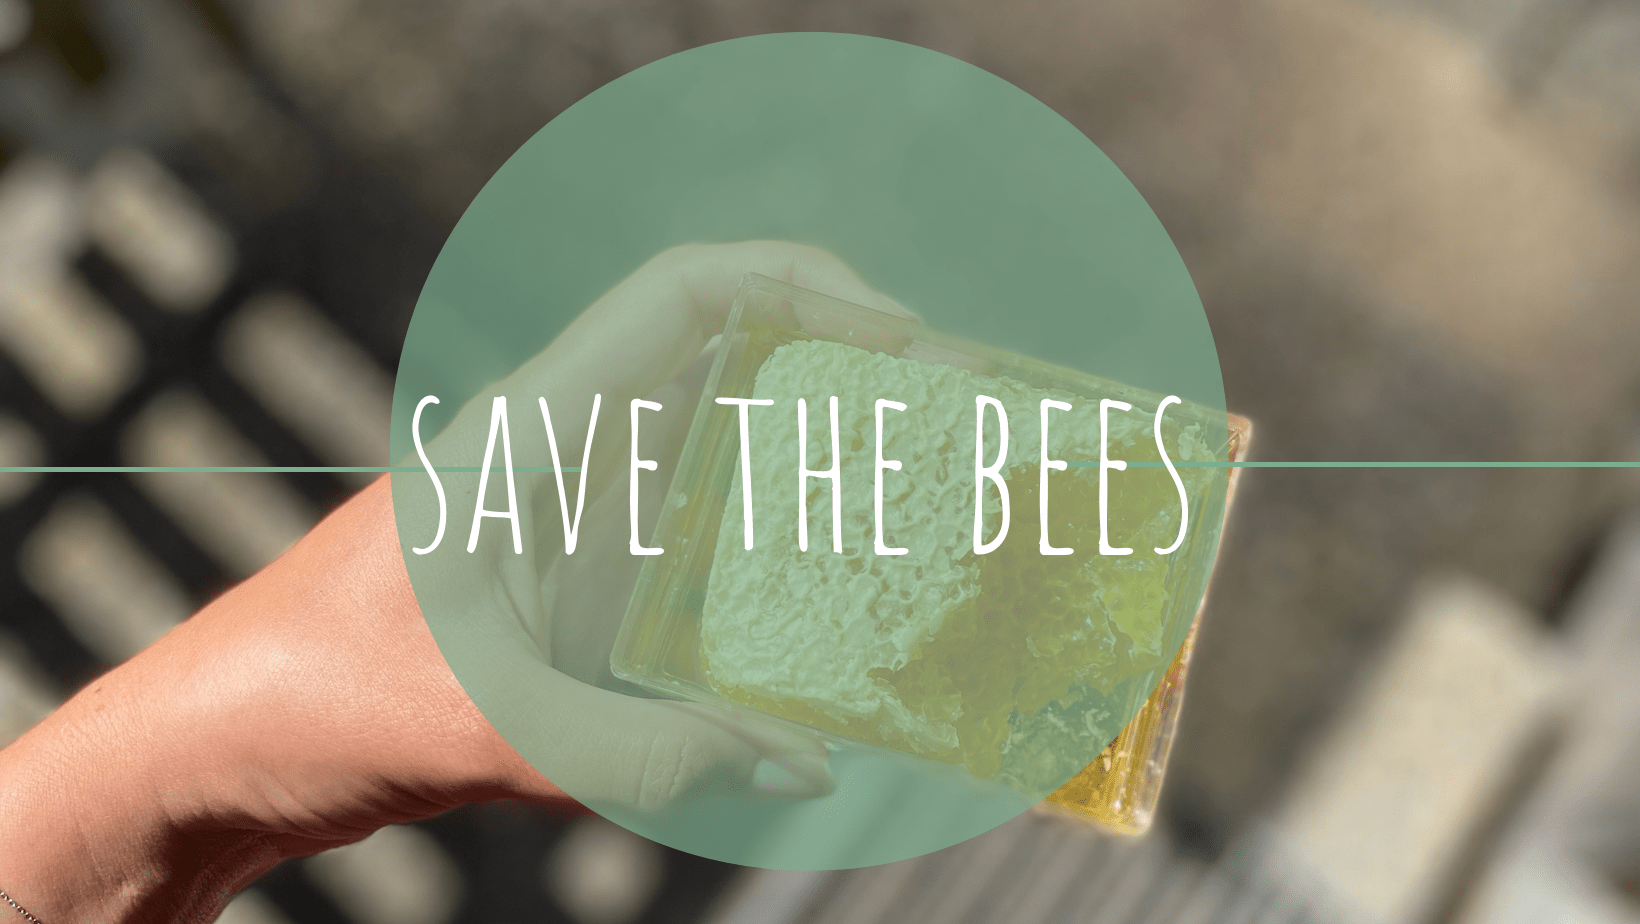 Titel Save the bees